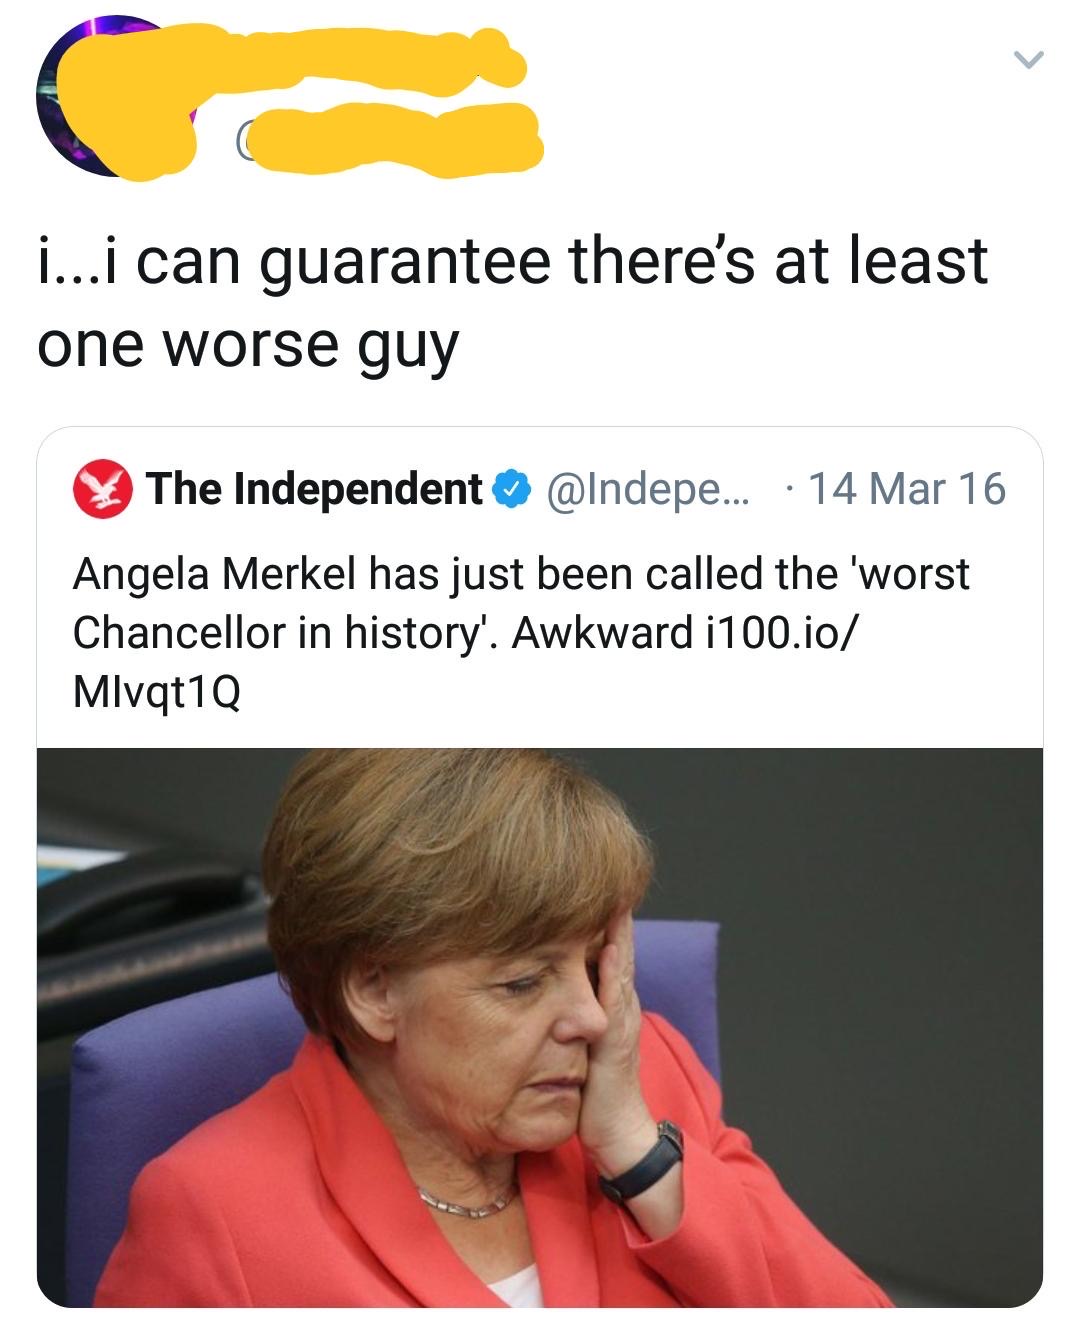 history meme - i...i can guarantee there's at least one worse guy The Independent ... 14 Mar 16 Angela Merkel has just been called the 'worst Chancellor in history'. Awkward i100.io Mlvqt1Q